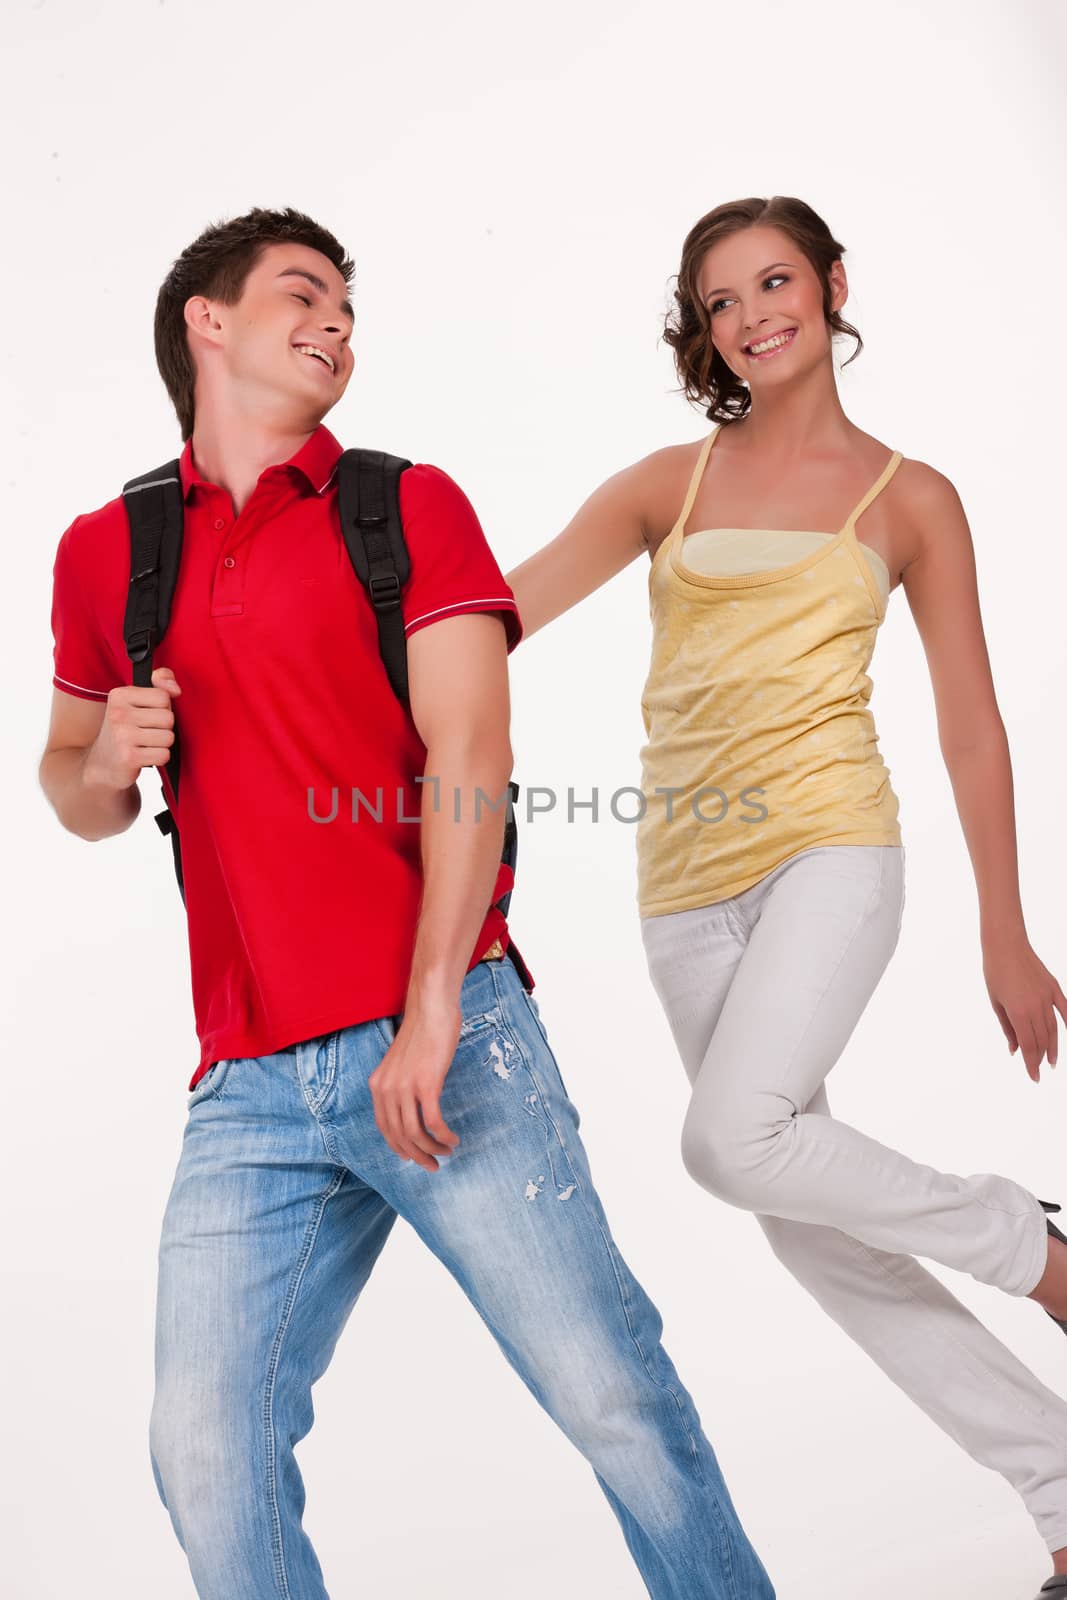 Young man and woman smiling on isolated background